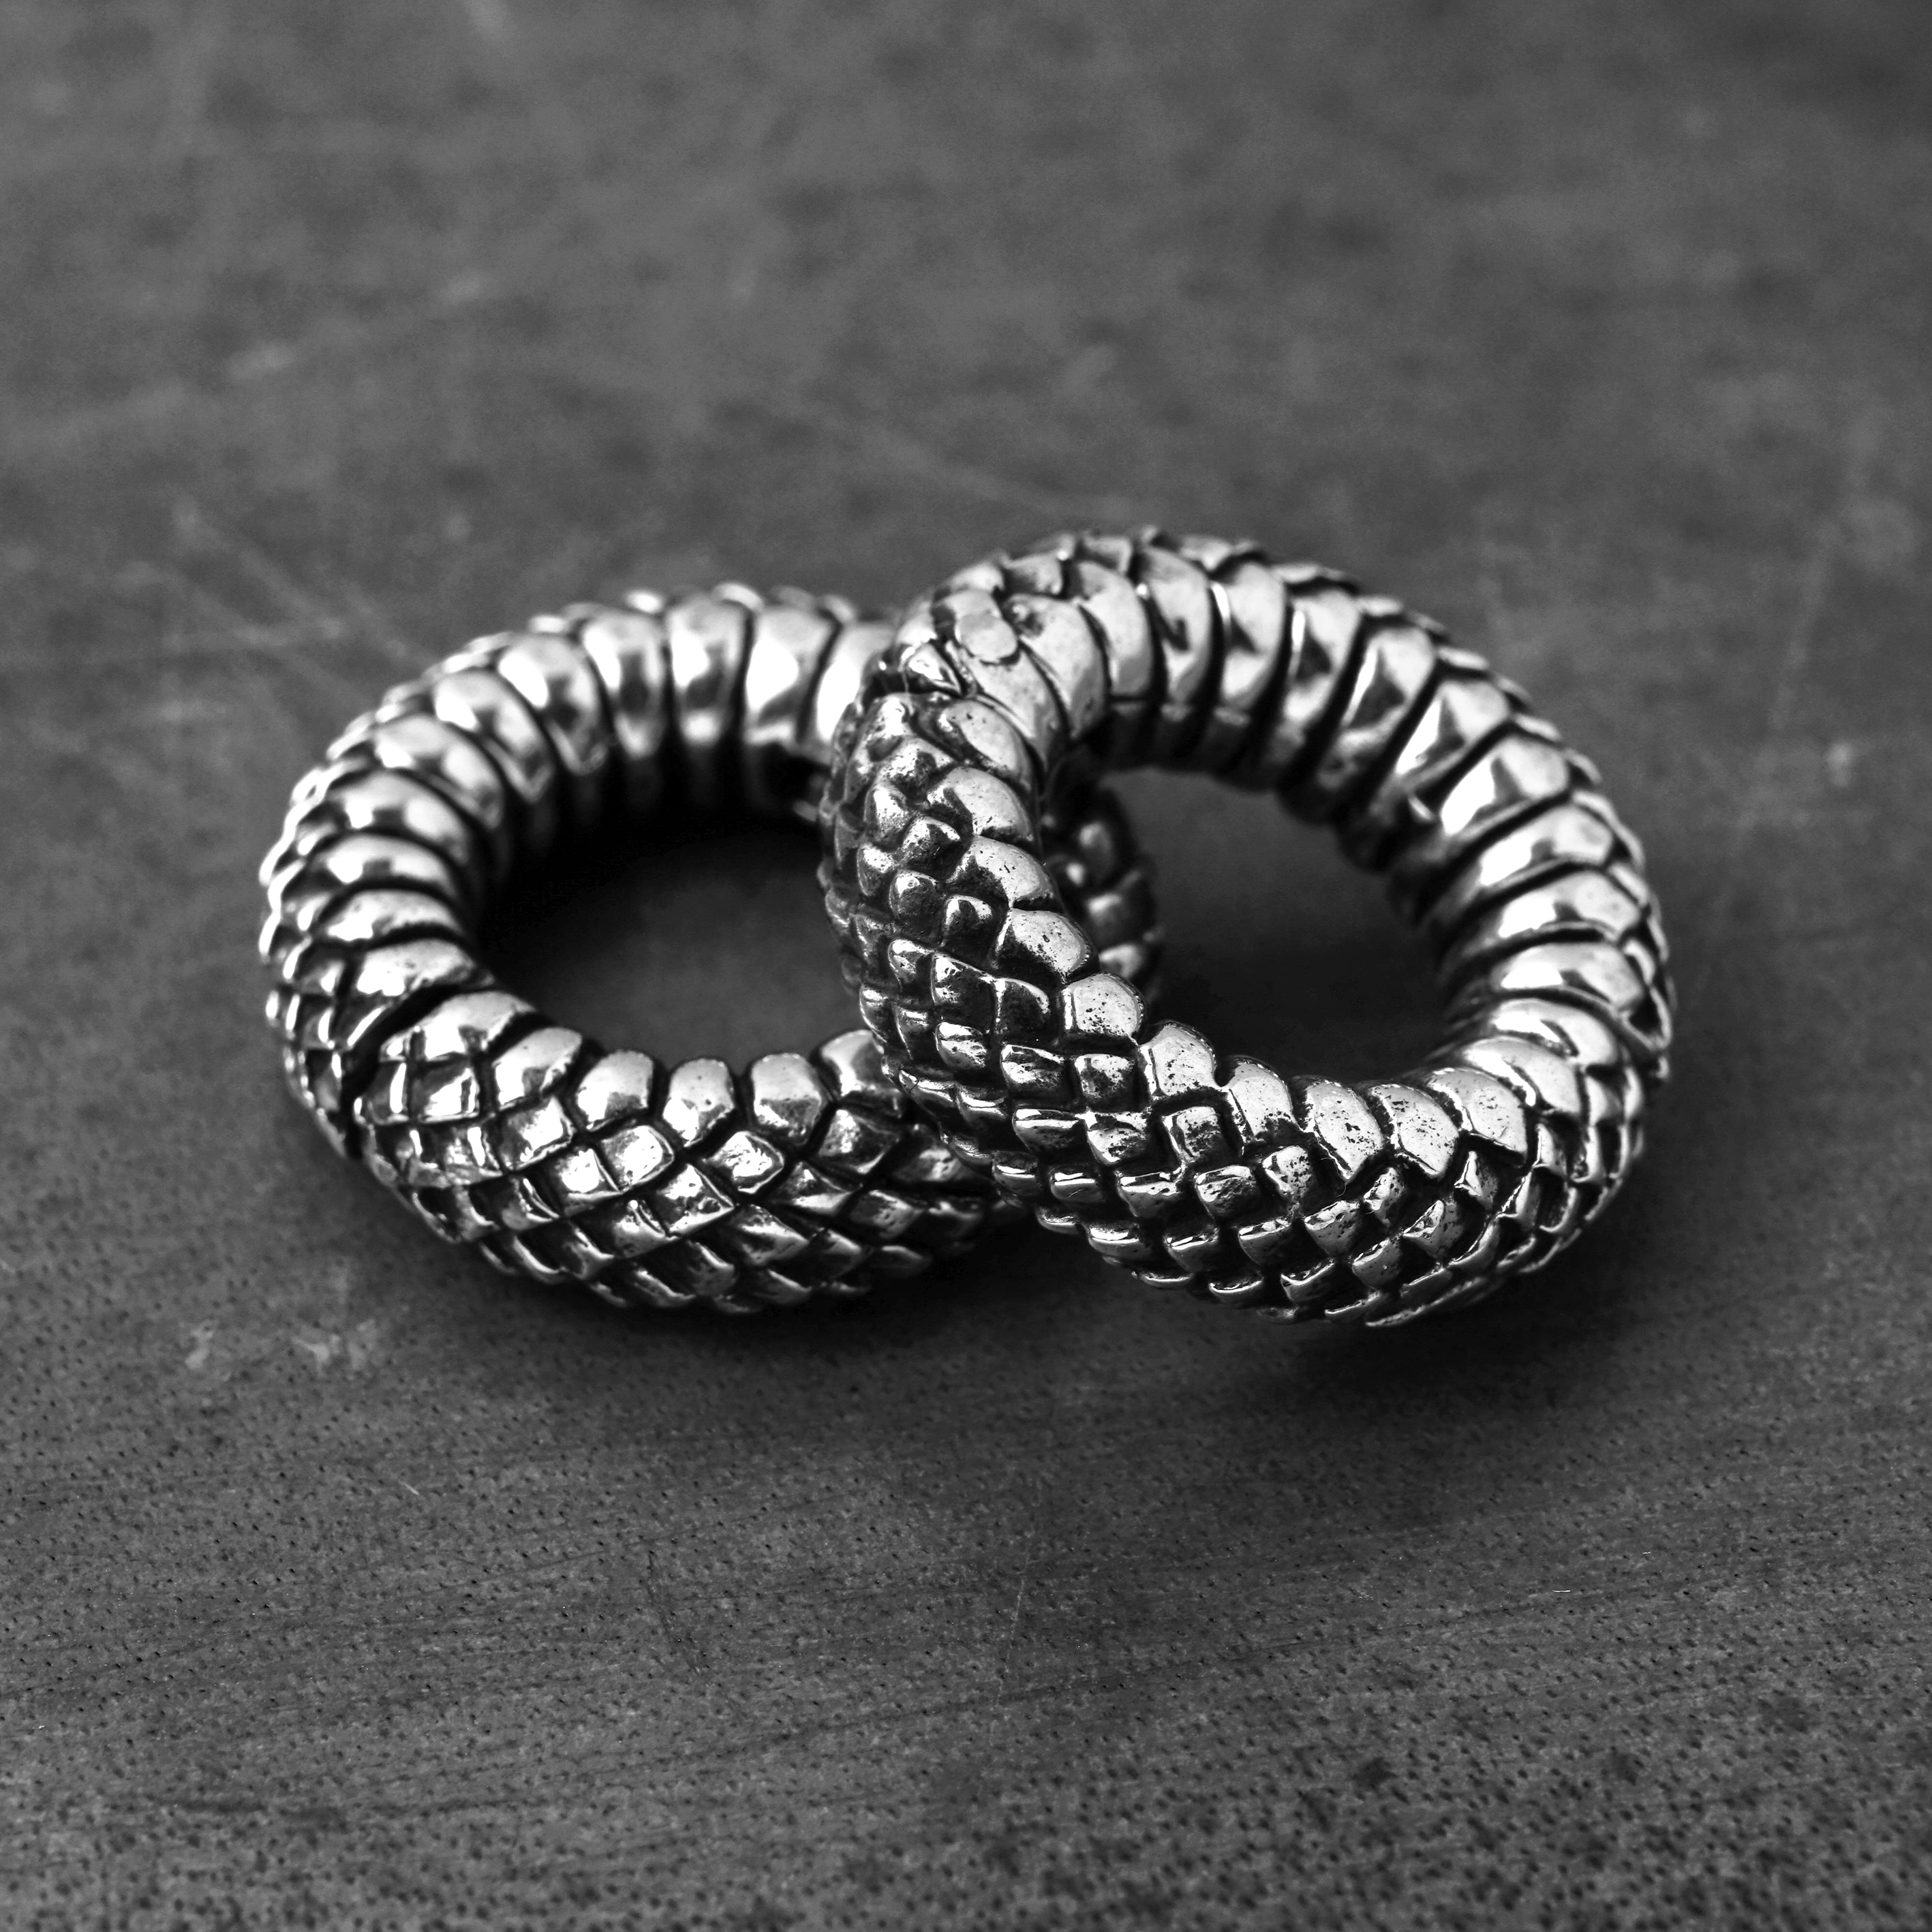 Snakes-skin-silver-weights-collection